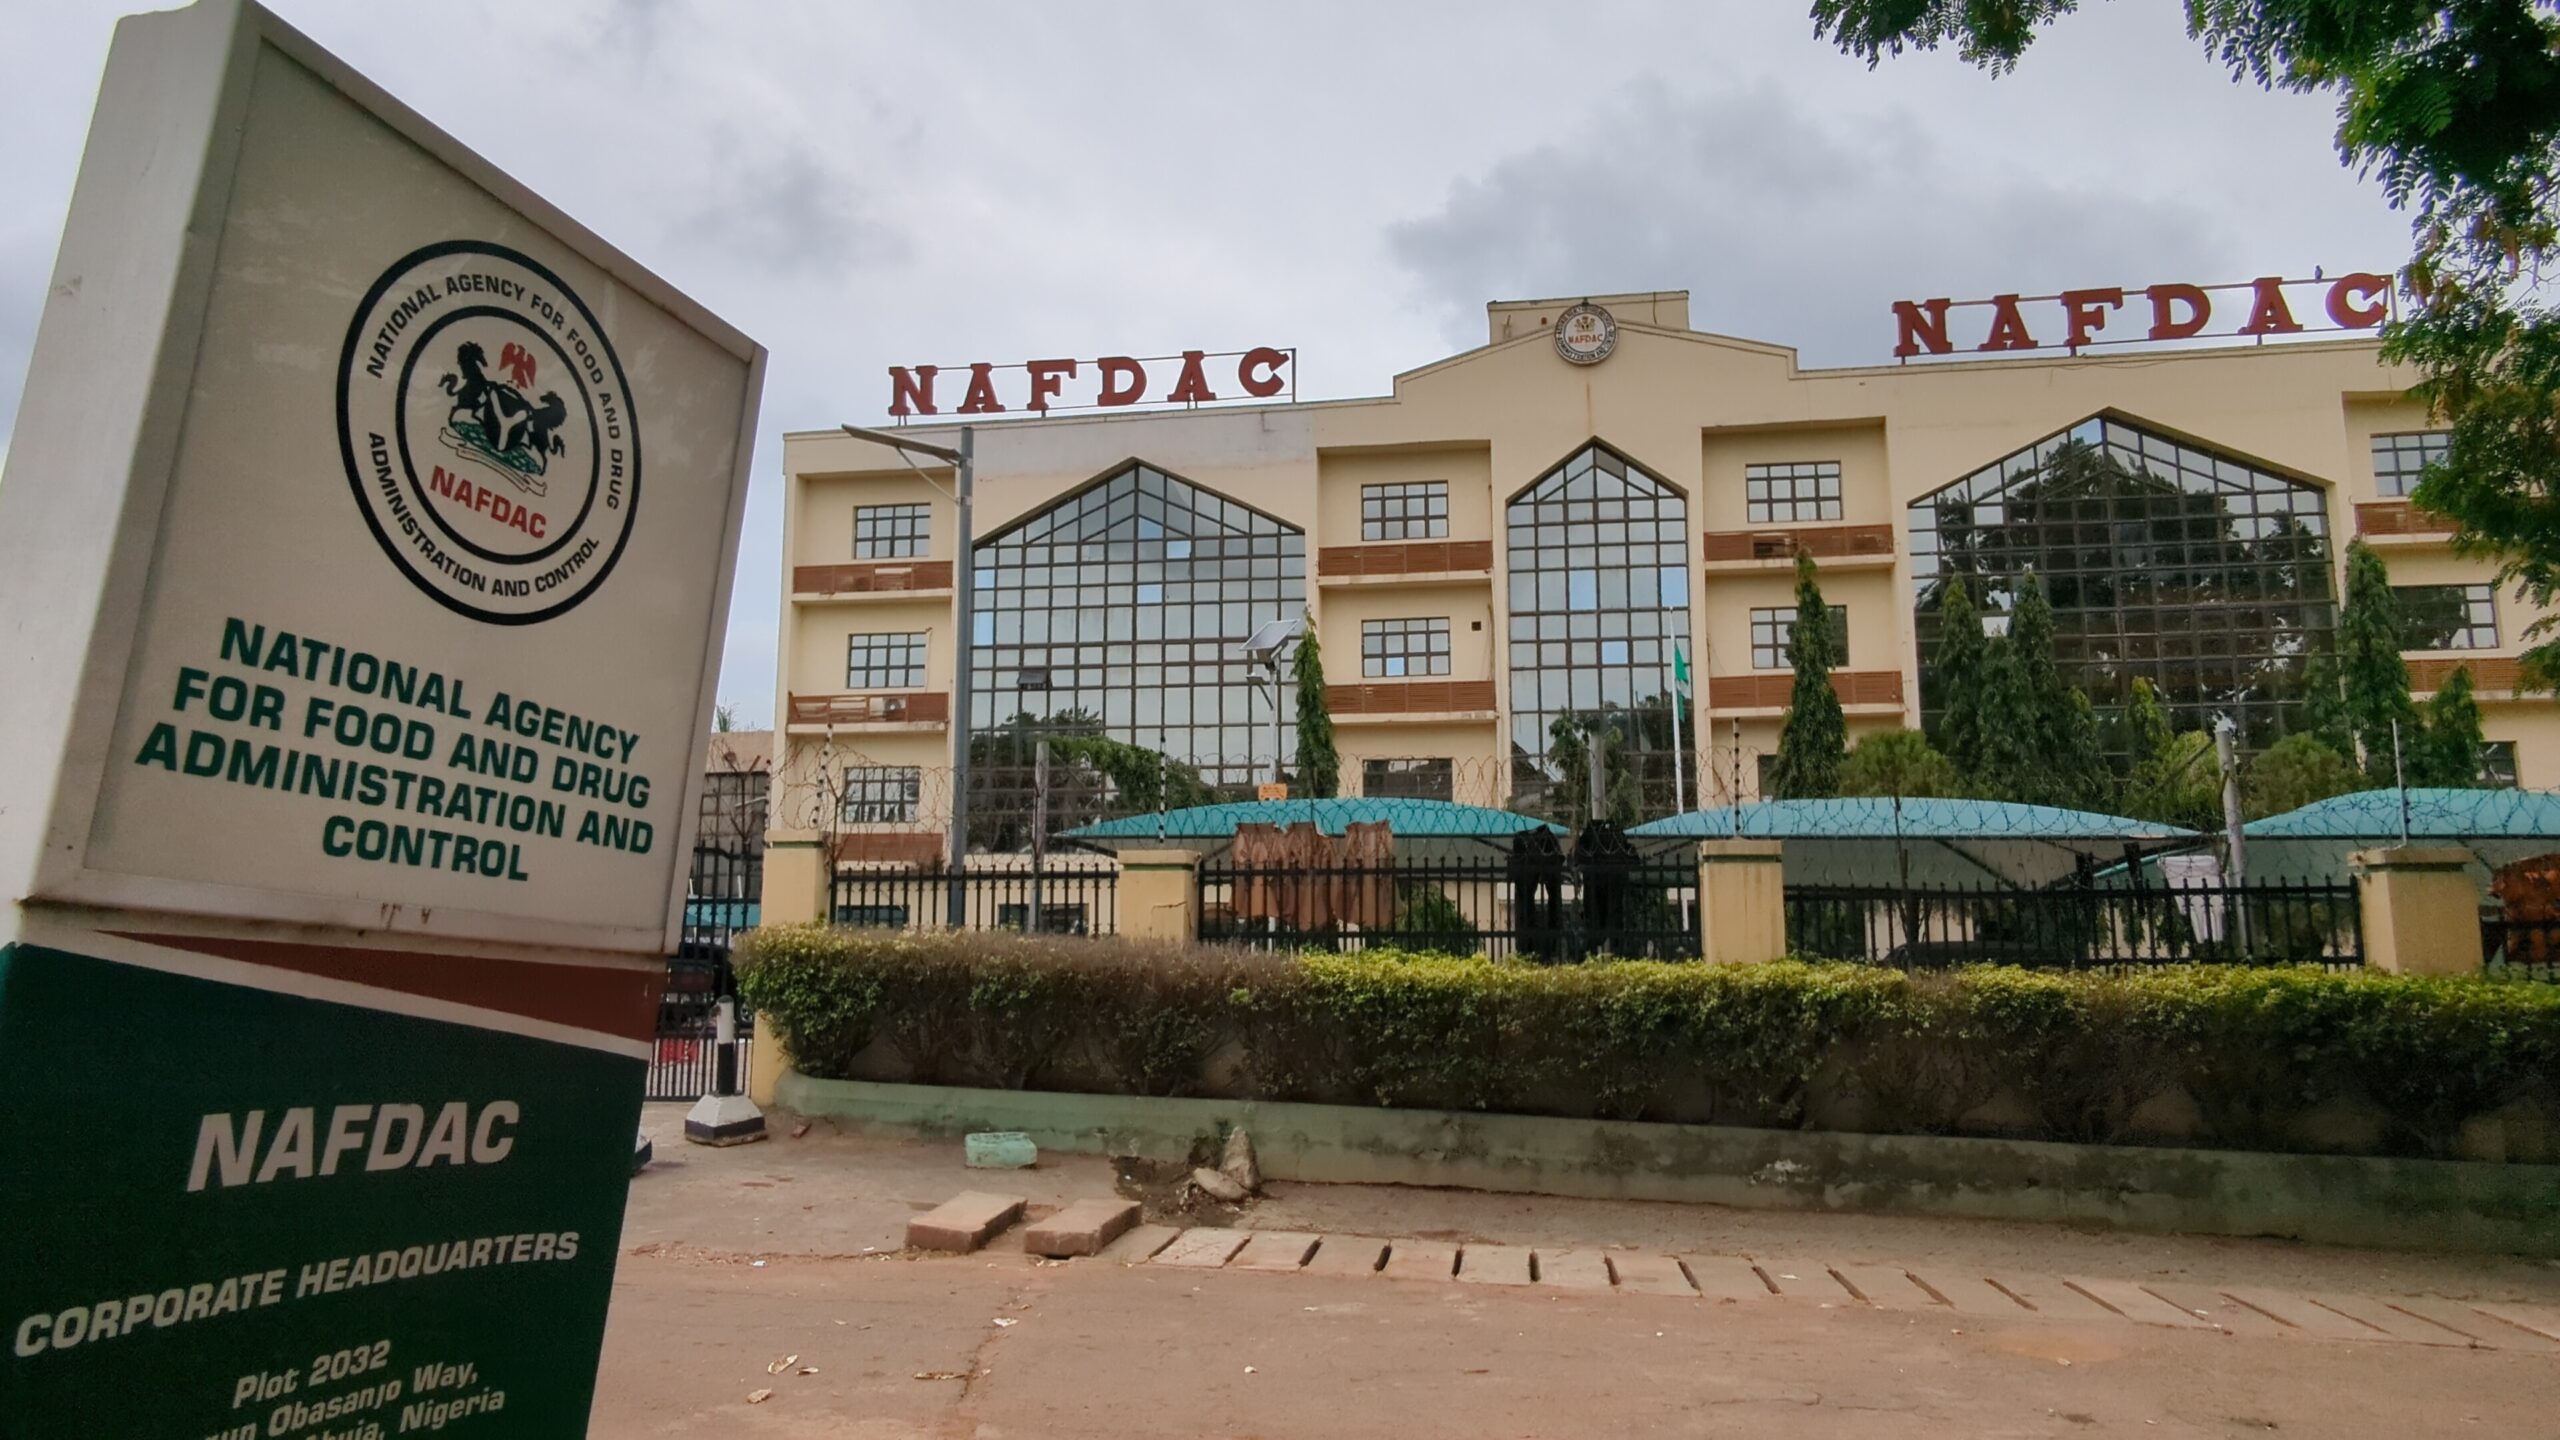 NAFDAC: Bakeries, Other Facilities Sealed For Operating Without Approval In Plateau 